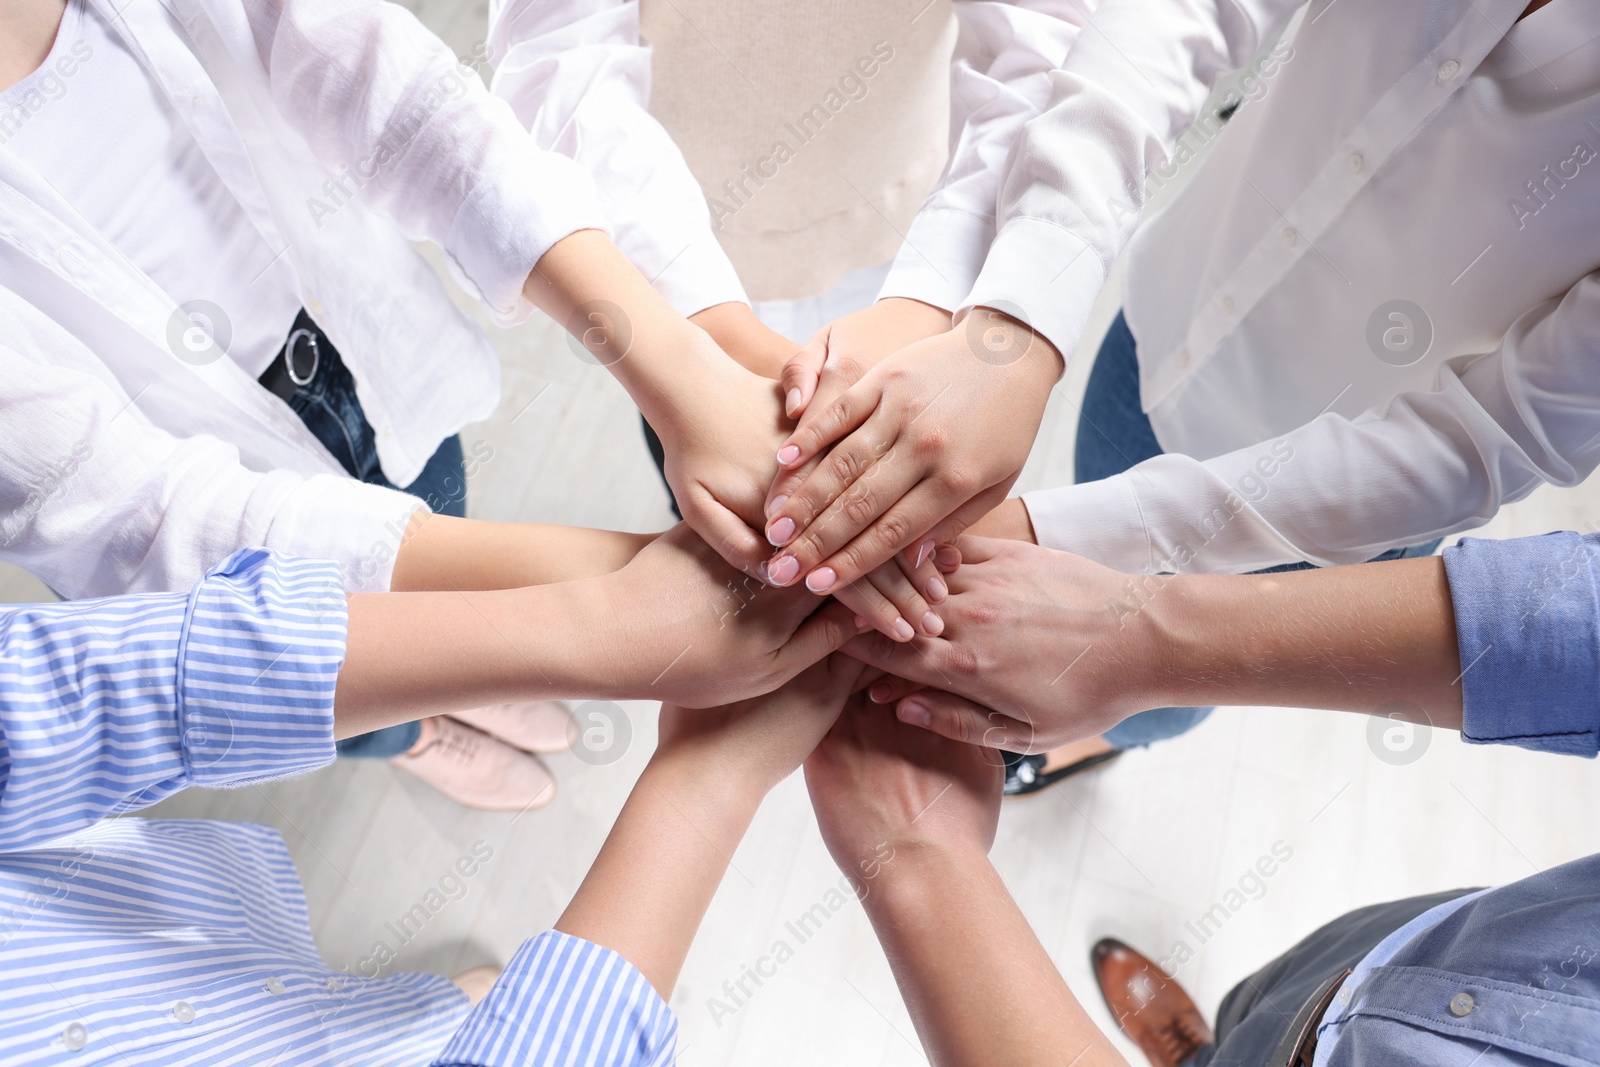 Photo of Group of people holding hands together indoors, above view. Unity concept